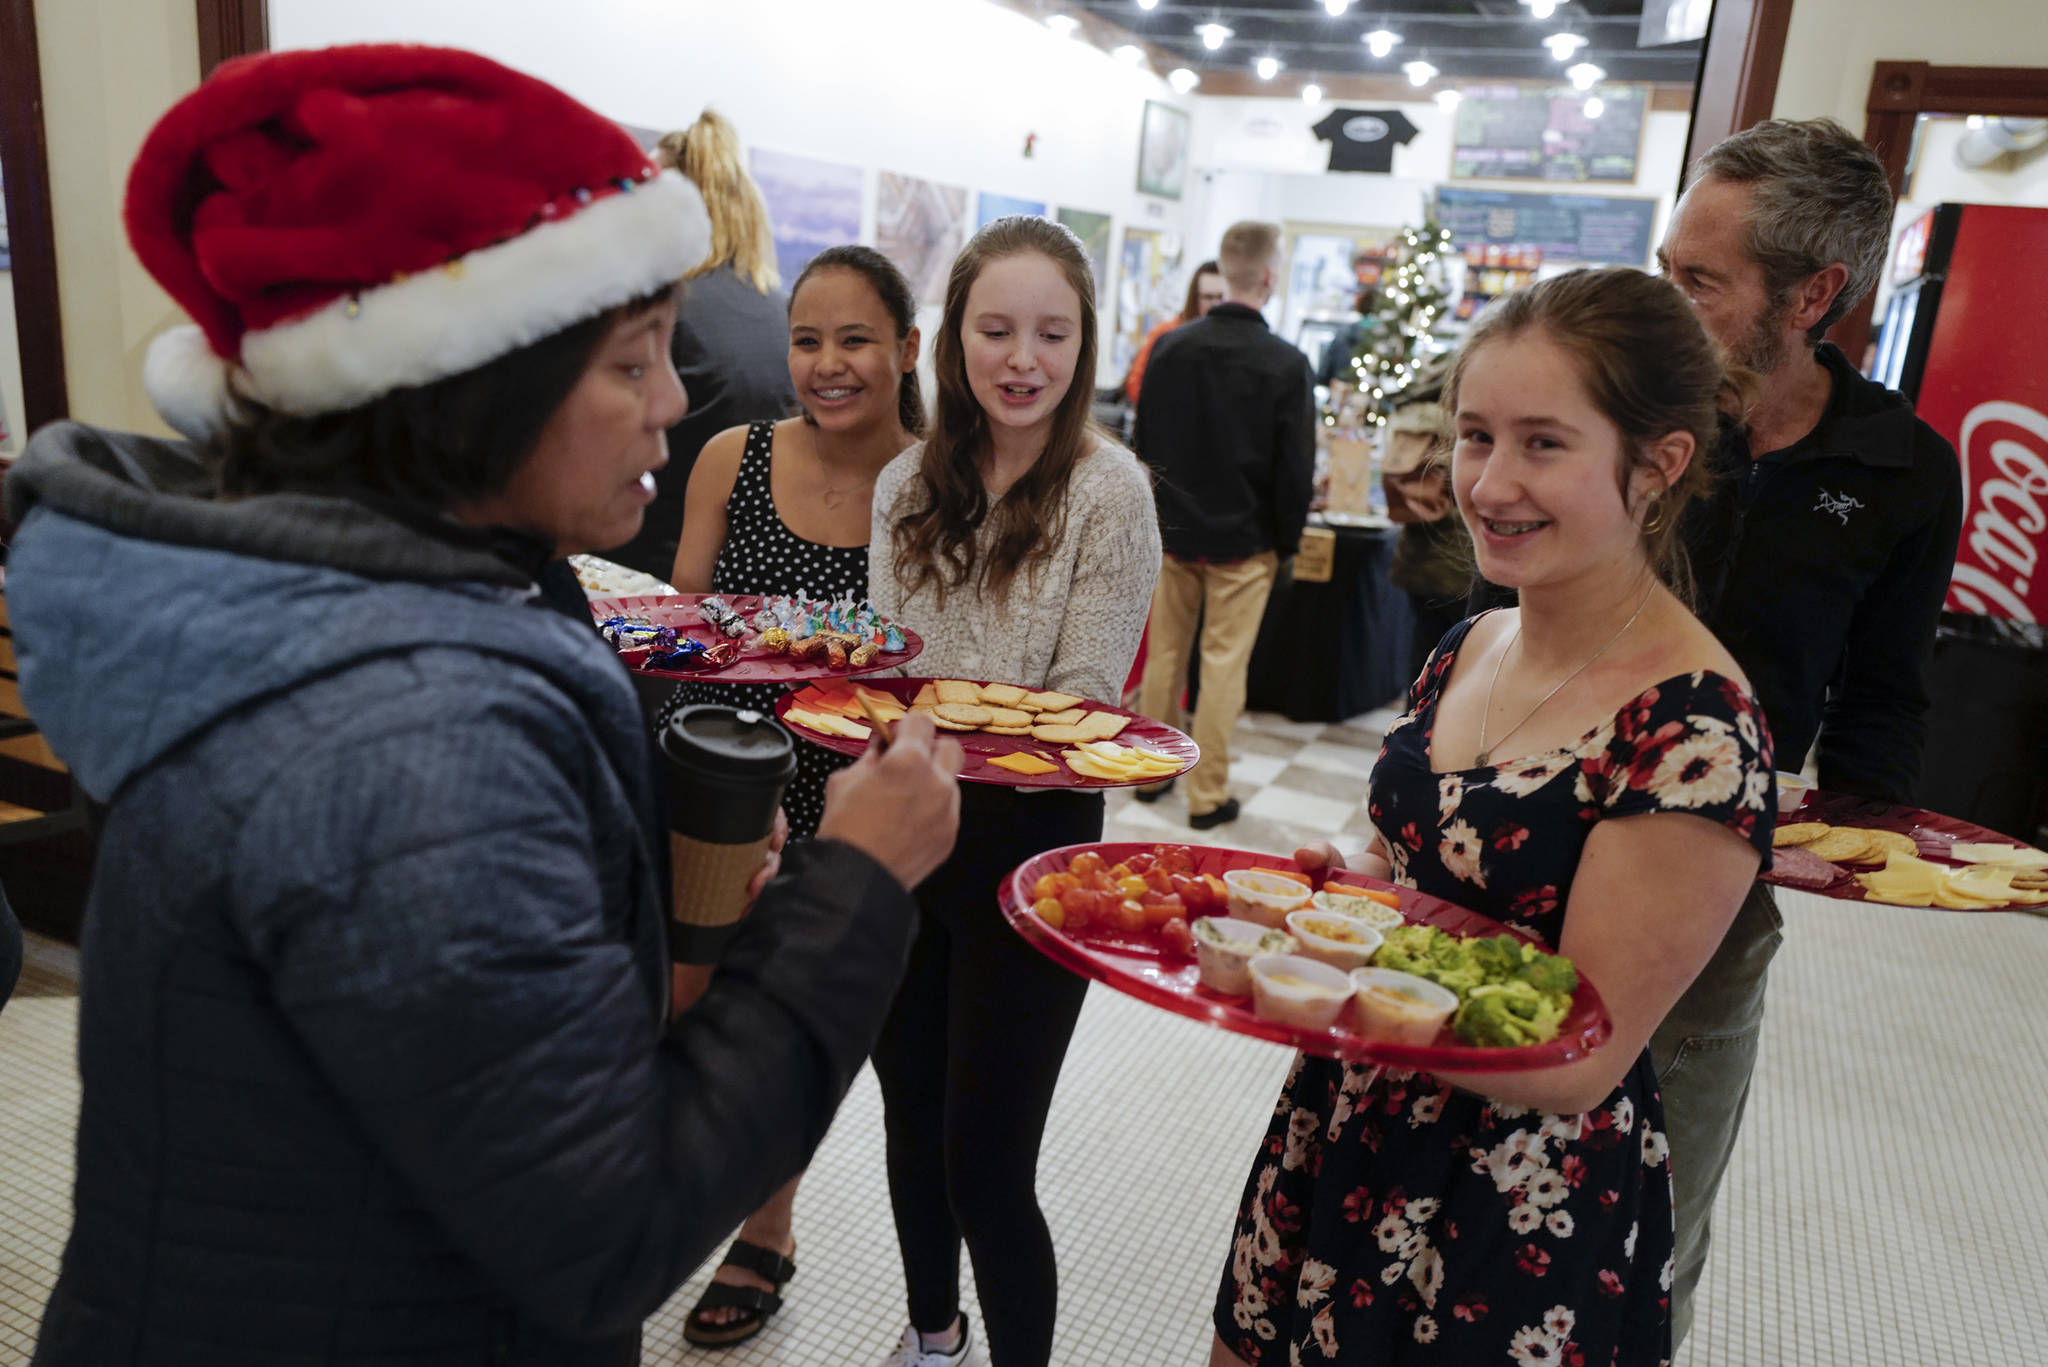 Adelie McMillian, right, Lydia Powers, center, and Dominique Morley, all members of figure skating team, serve trays of treats to visitors to the Senate Building during Gallery Walk on Friday, Dec. 6, 2019. (Michael Penn | Juneau Empire)